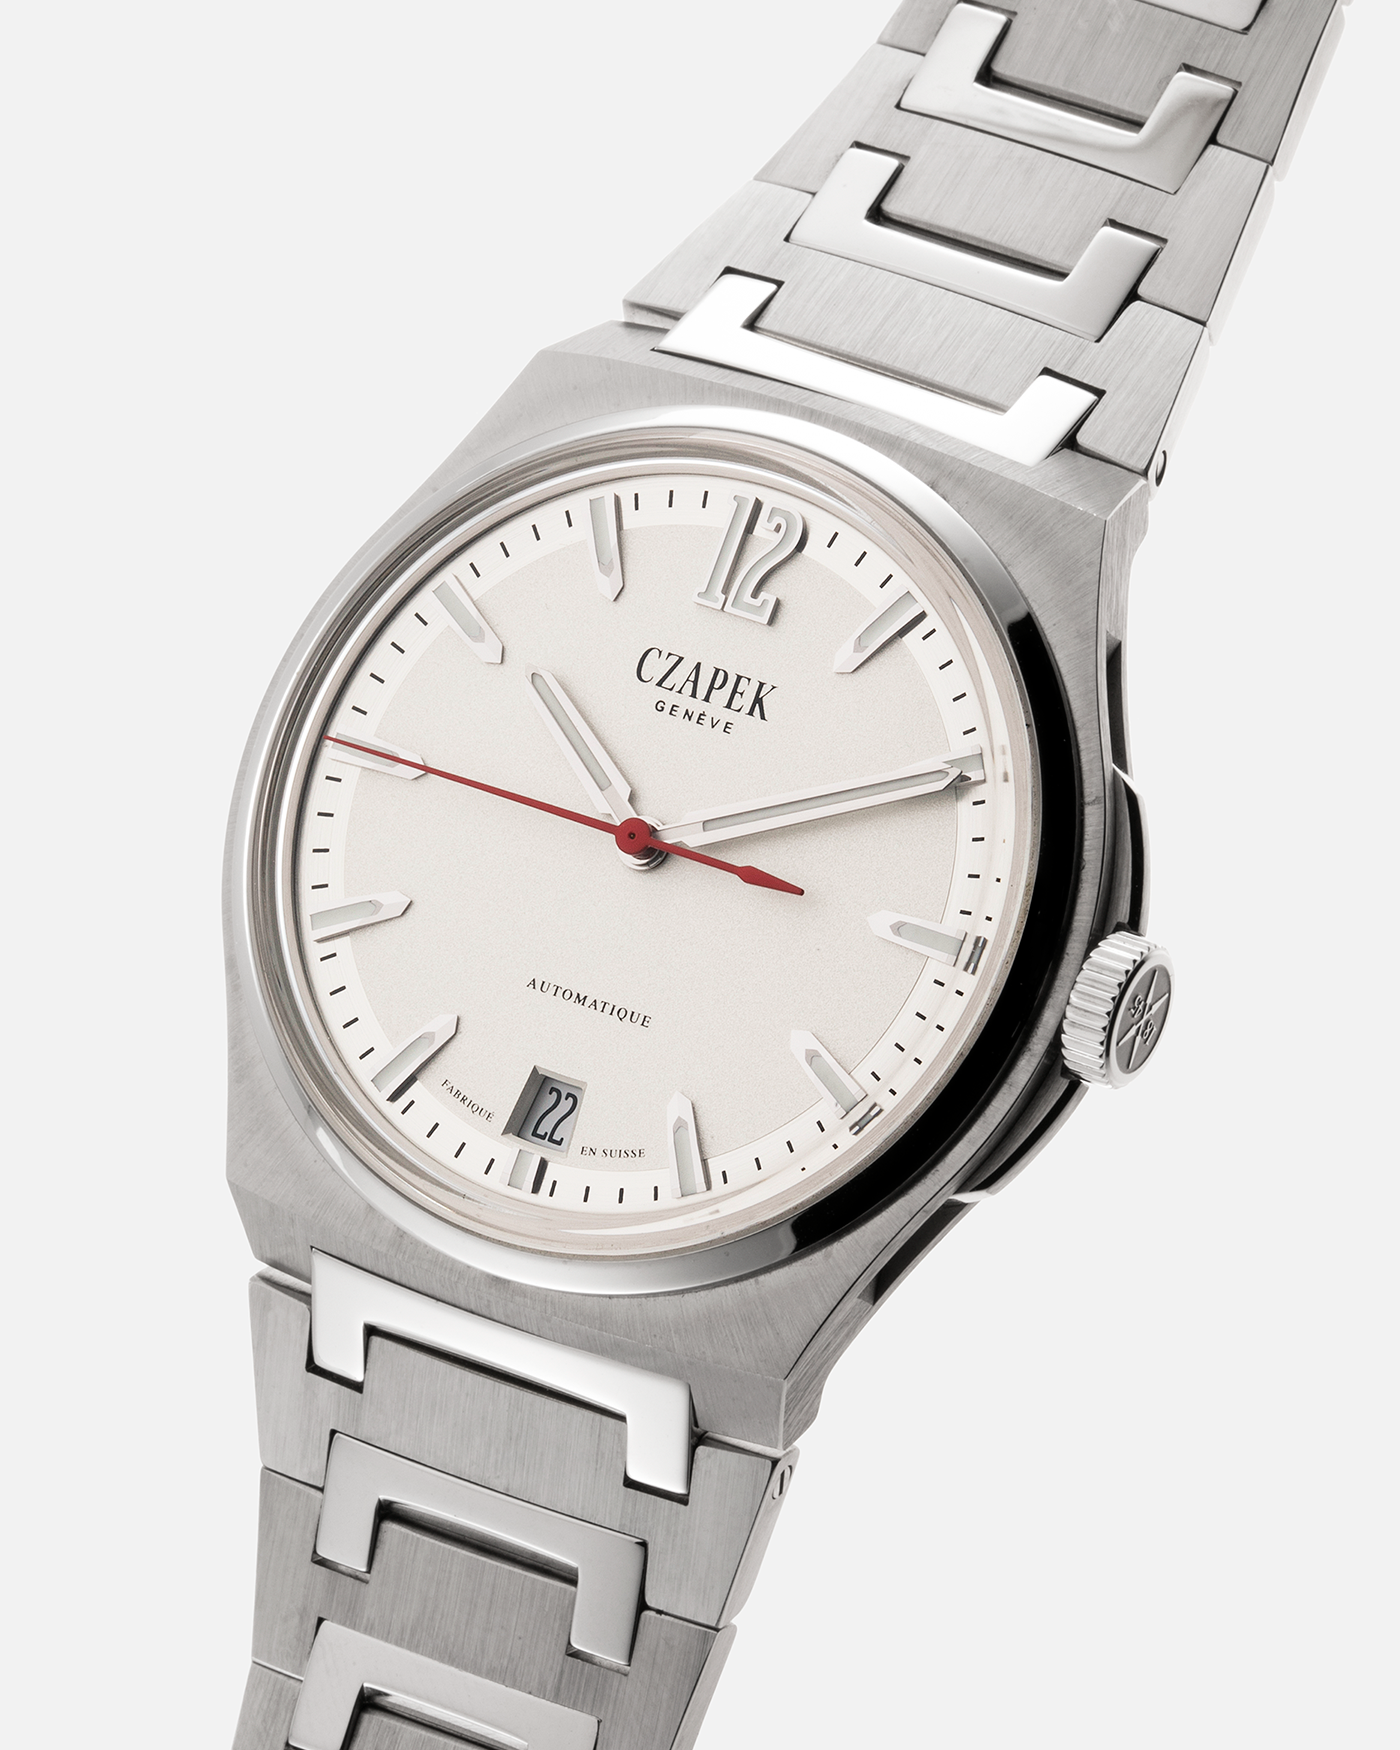 Brand: Czapek  Year: 2021 Model: Antarctique “Monochrome White”, Limited Edition of 33 pieces Material: Stainless Steel Movement: Cal. SXH5, Self-Winding, Platinum Micro-Rotor Case Diameter: 40.5mm Strap: Czapek Integrated Stainless Steel Bracelet with Signed Deployant Clasp and Micro-adjust Mechanism, additional Blue Czapek Rubber Strap with Signed Stainless Steel Deployant Clasp